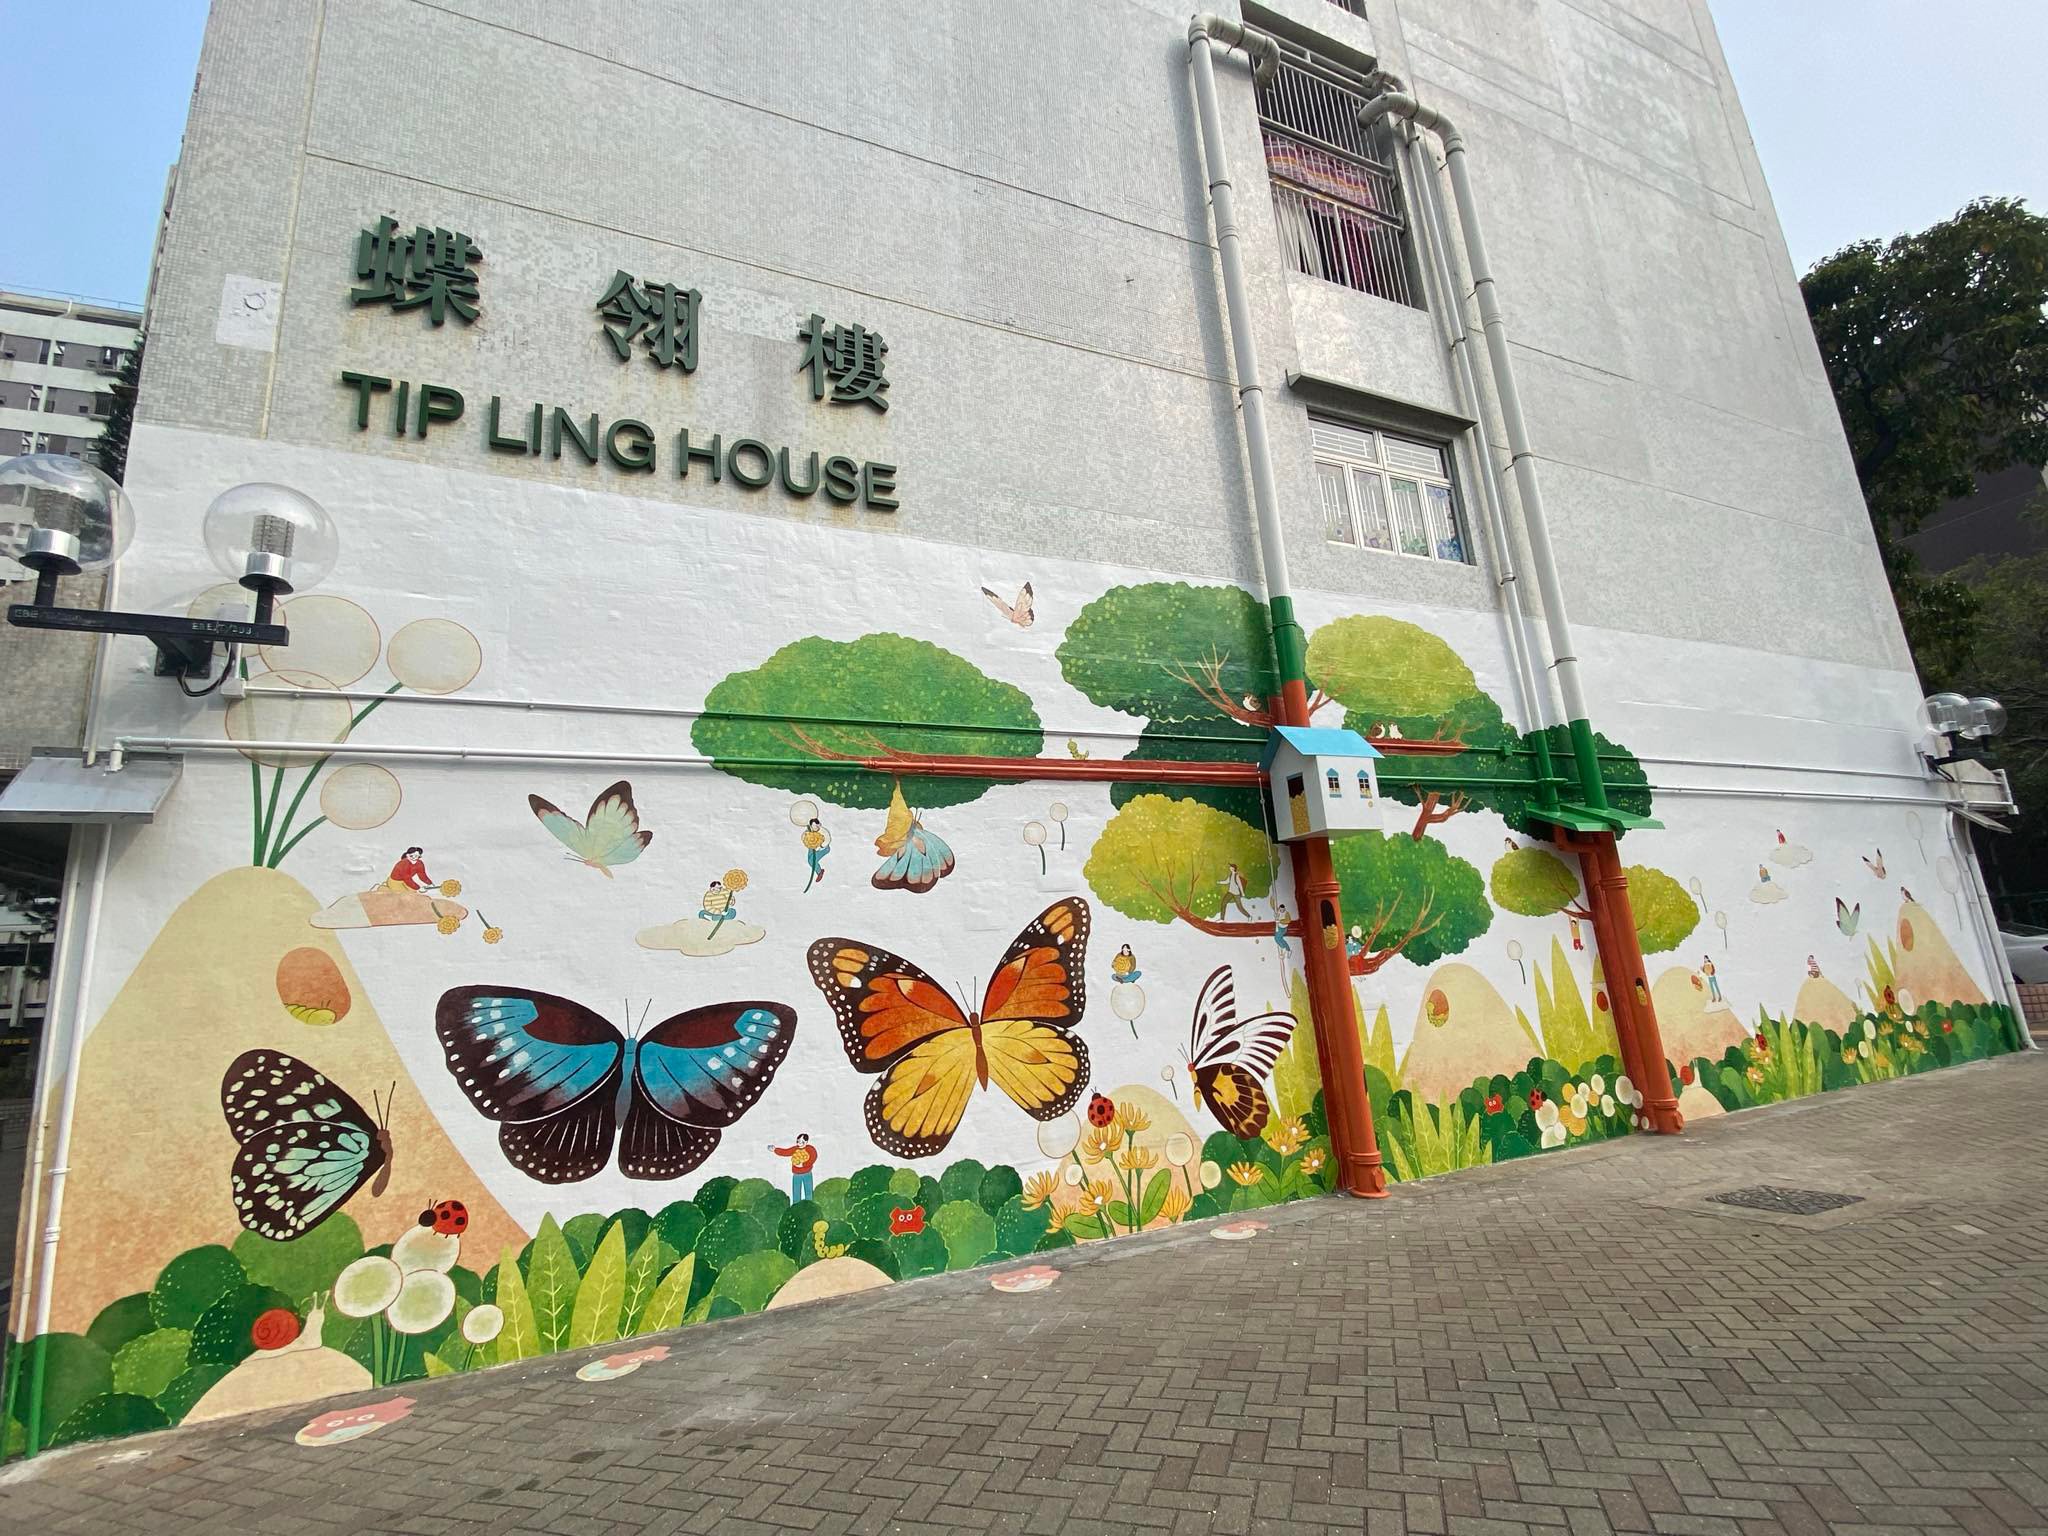 The new design at Butterfly Estate includes the decoration of exterior walls and upgrading of public spaces to improve the environment. Photo: Fiona Sun